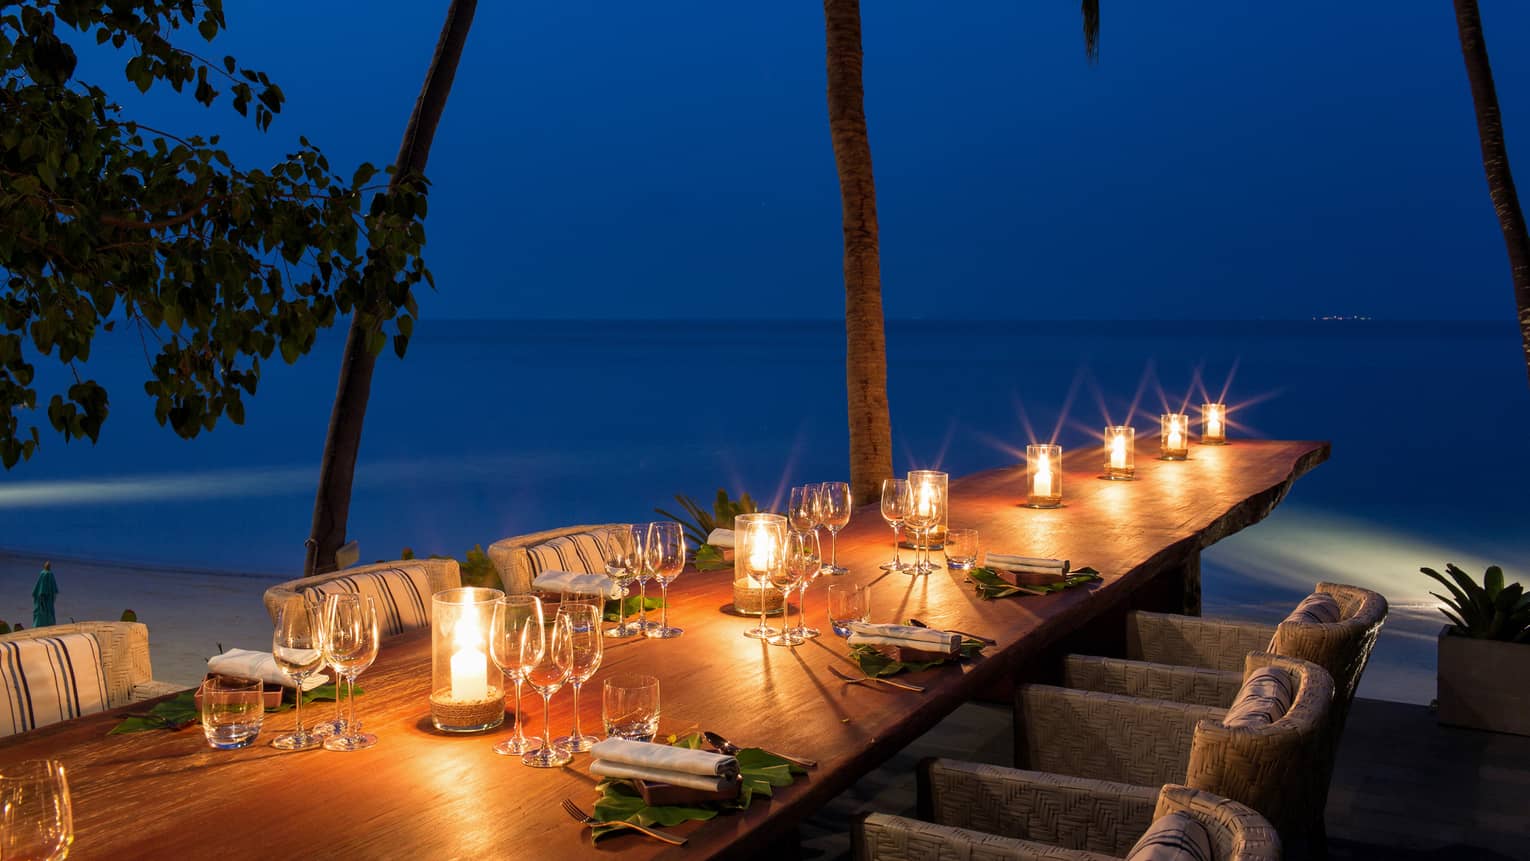 Outdoor dining venue with a view of the Gulf of Thailand